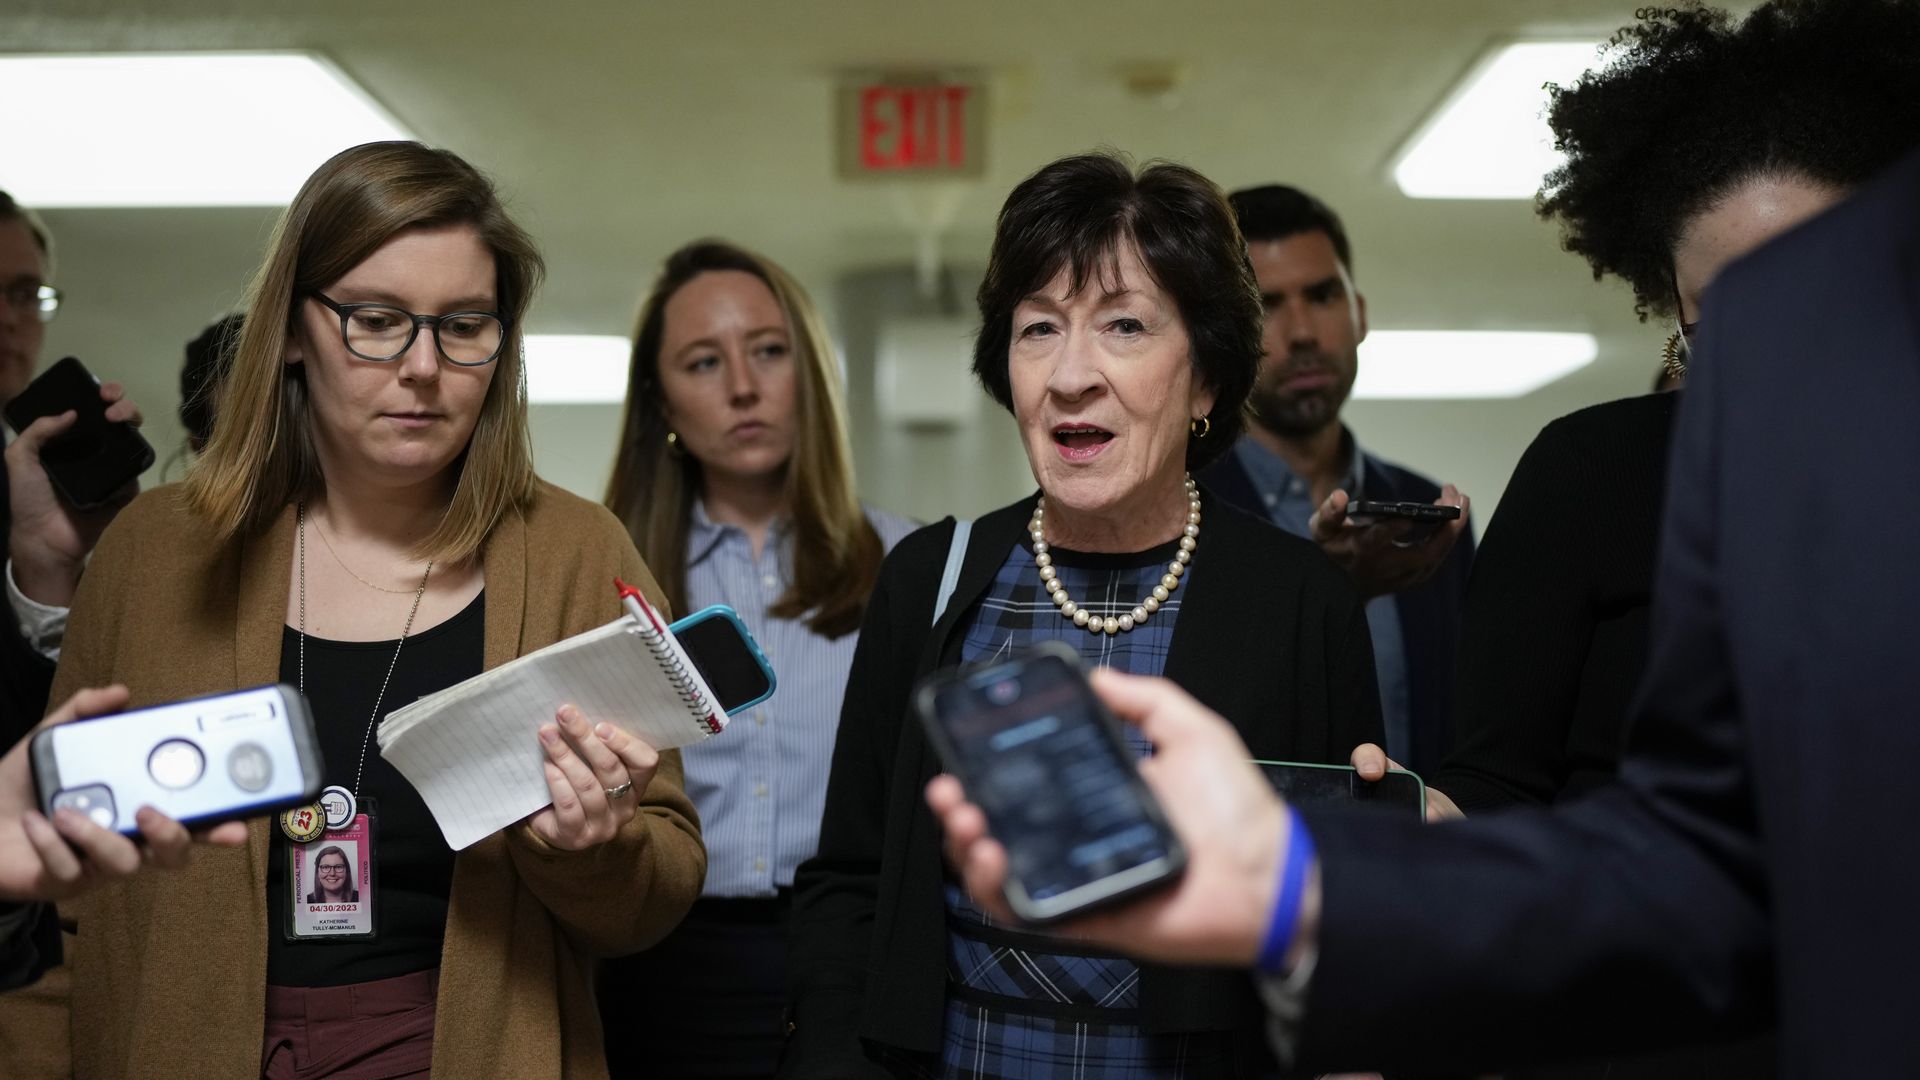 Sen. Susan Collins, wearing a black jacket, blue plaid dress and pearl necklace, speaks to reporters in the Capitol basement.